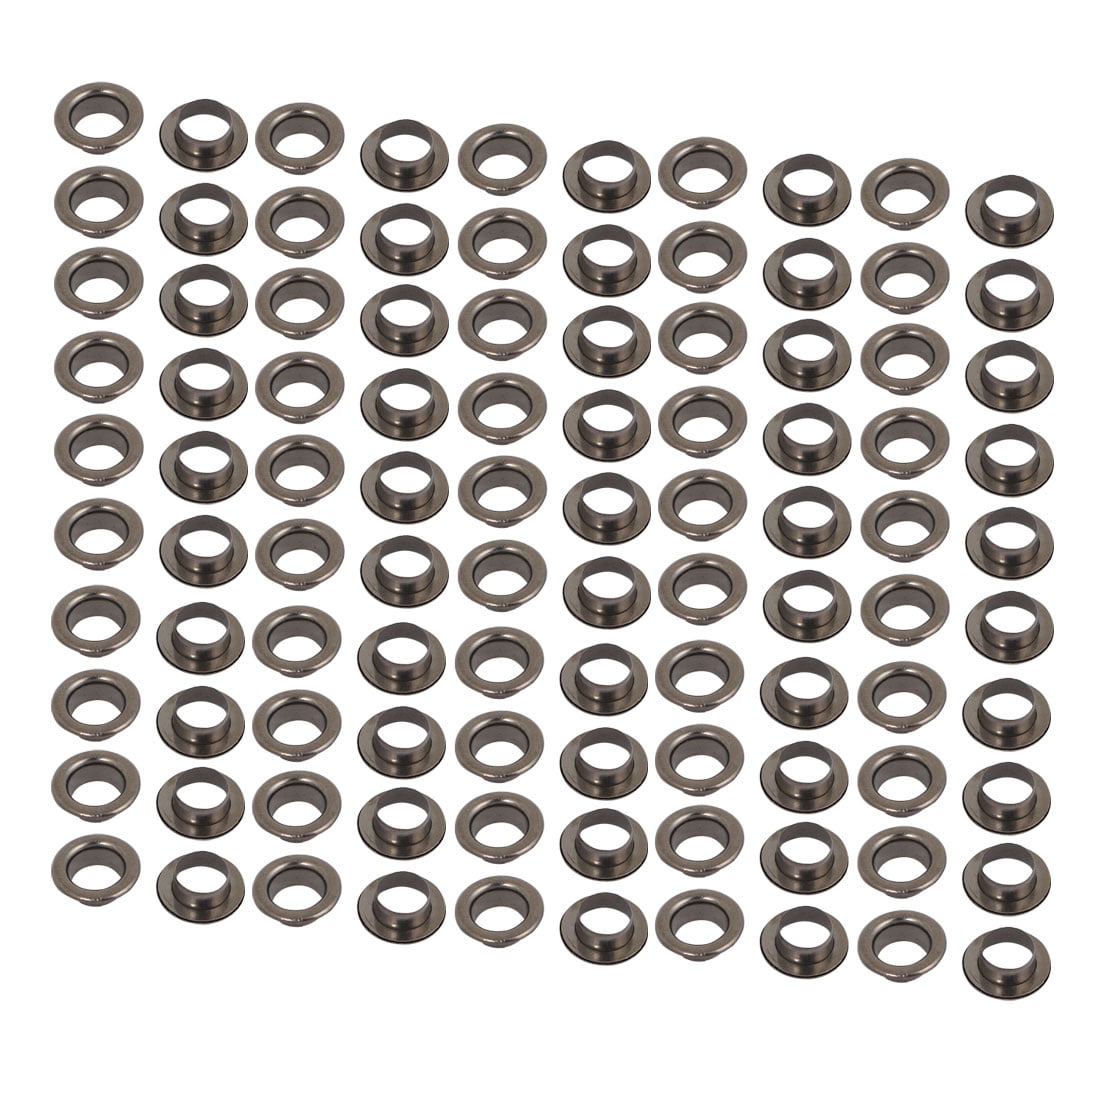 100pcs 6.5mm Brass Eyelet Grommets Black for Clothes Leather Canvas 